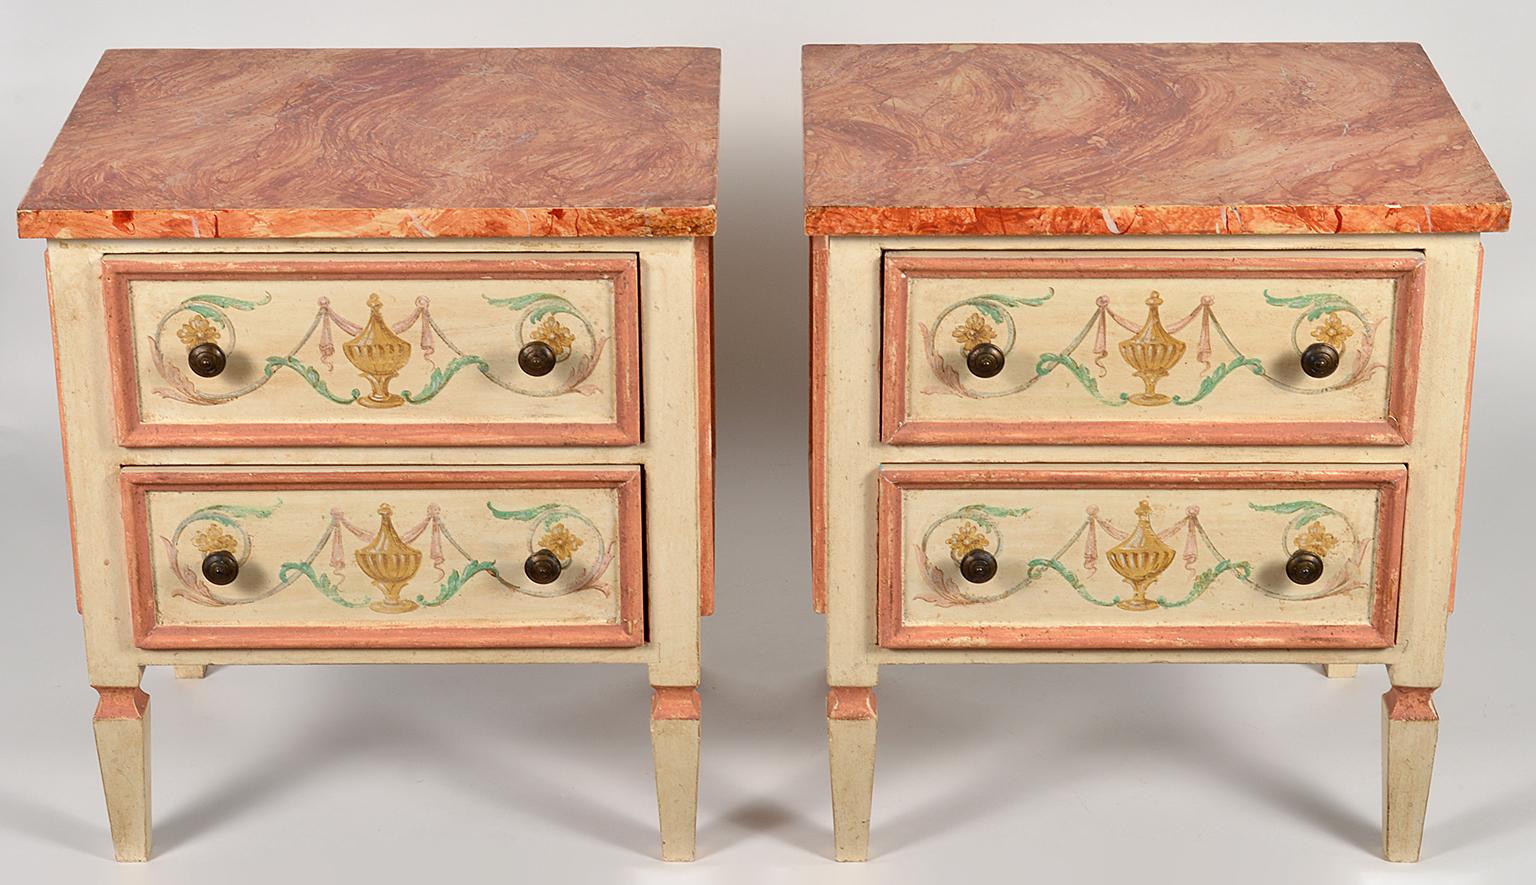 These charming 20th century commodes or night stands feature marbleised tops above two paneled drawers painted and decorated in the classical style with scrolls and urns. The commodes are painted and similarly decorated on all sides.